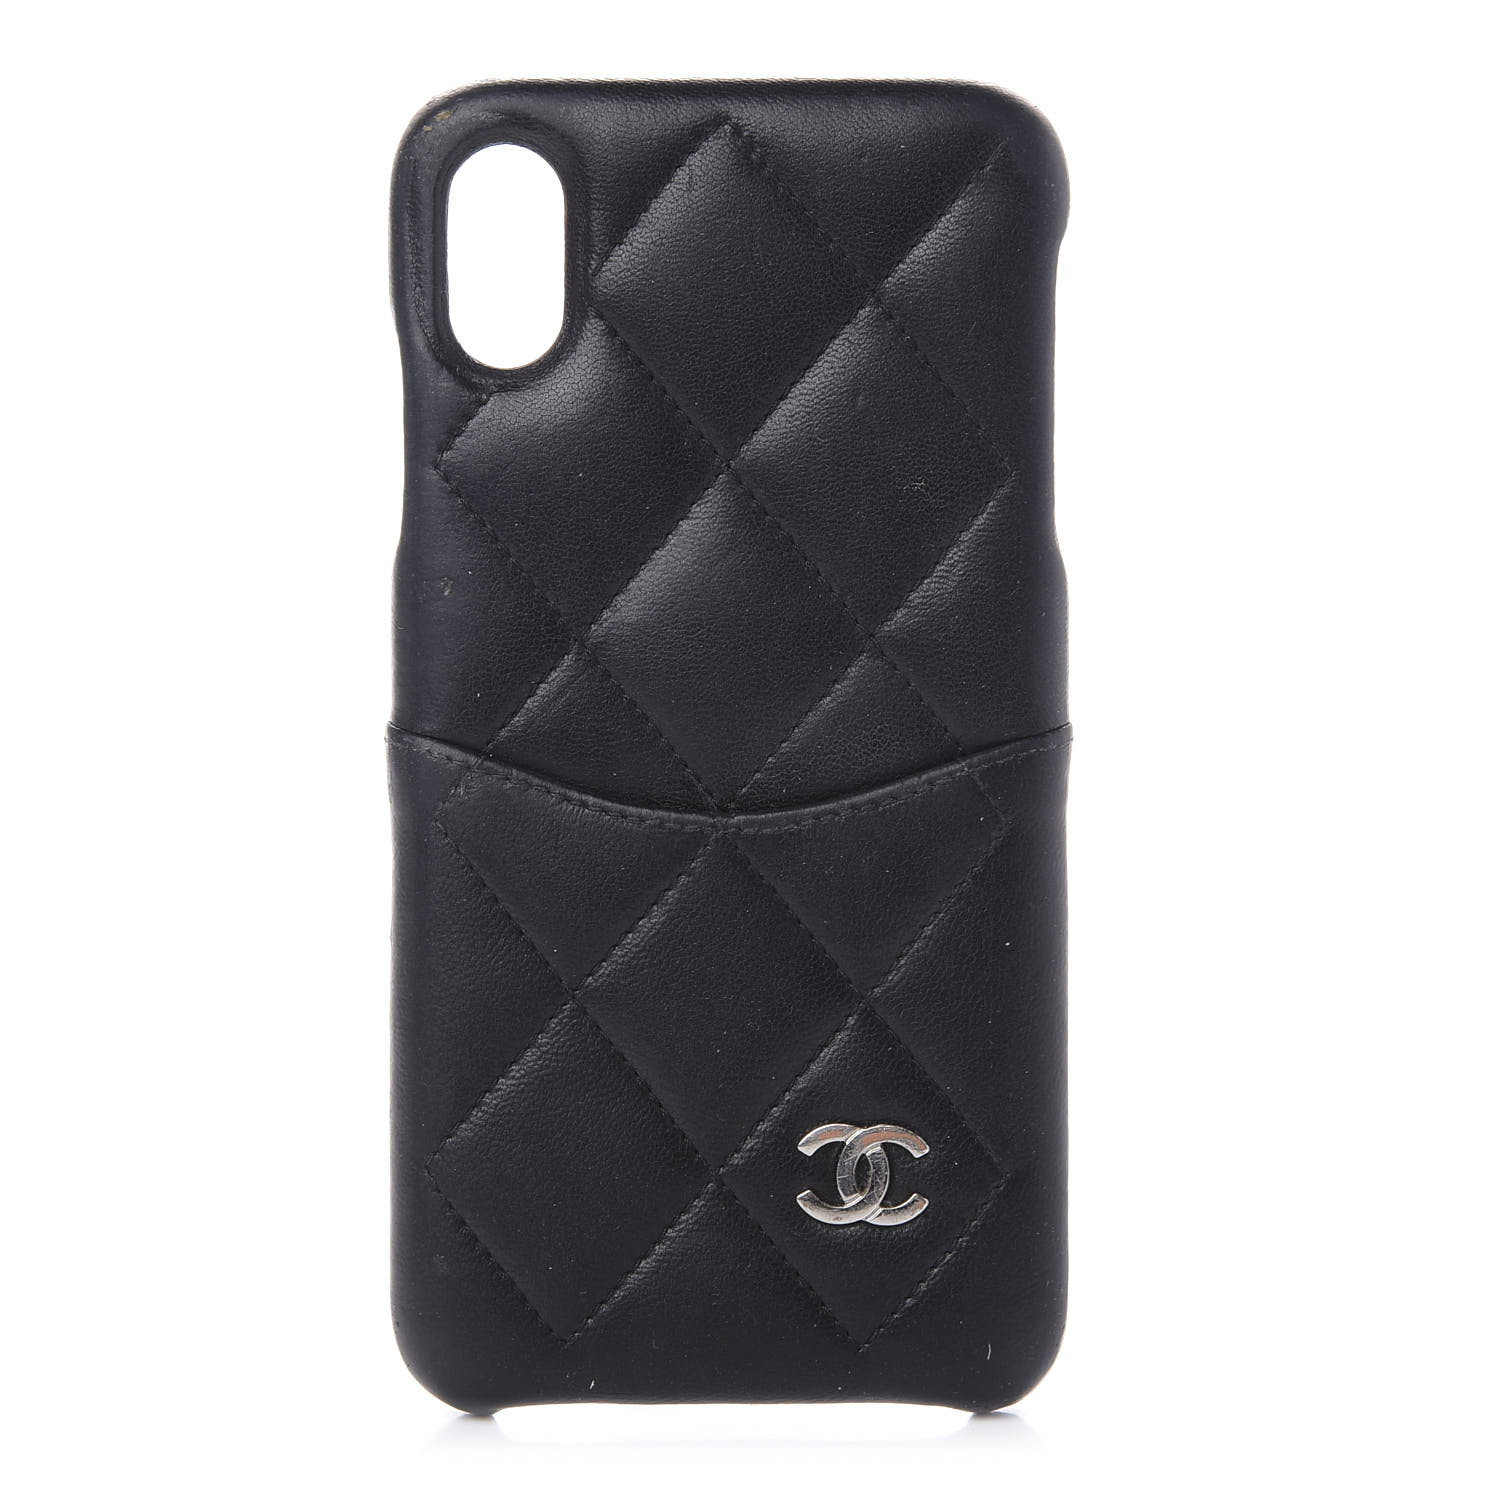 Chanel Lambskin Quilted Iphone Xs Max Coco Tech Case Black 6016 Fashionphile